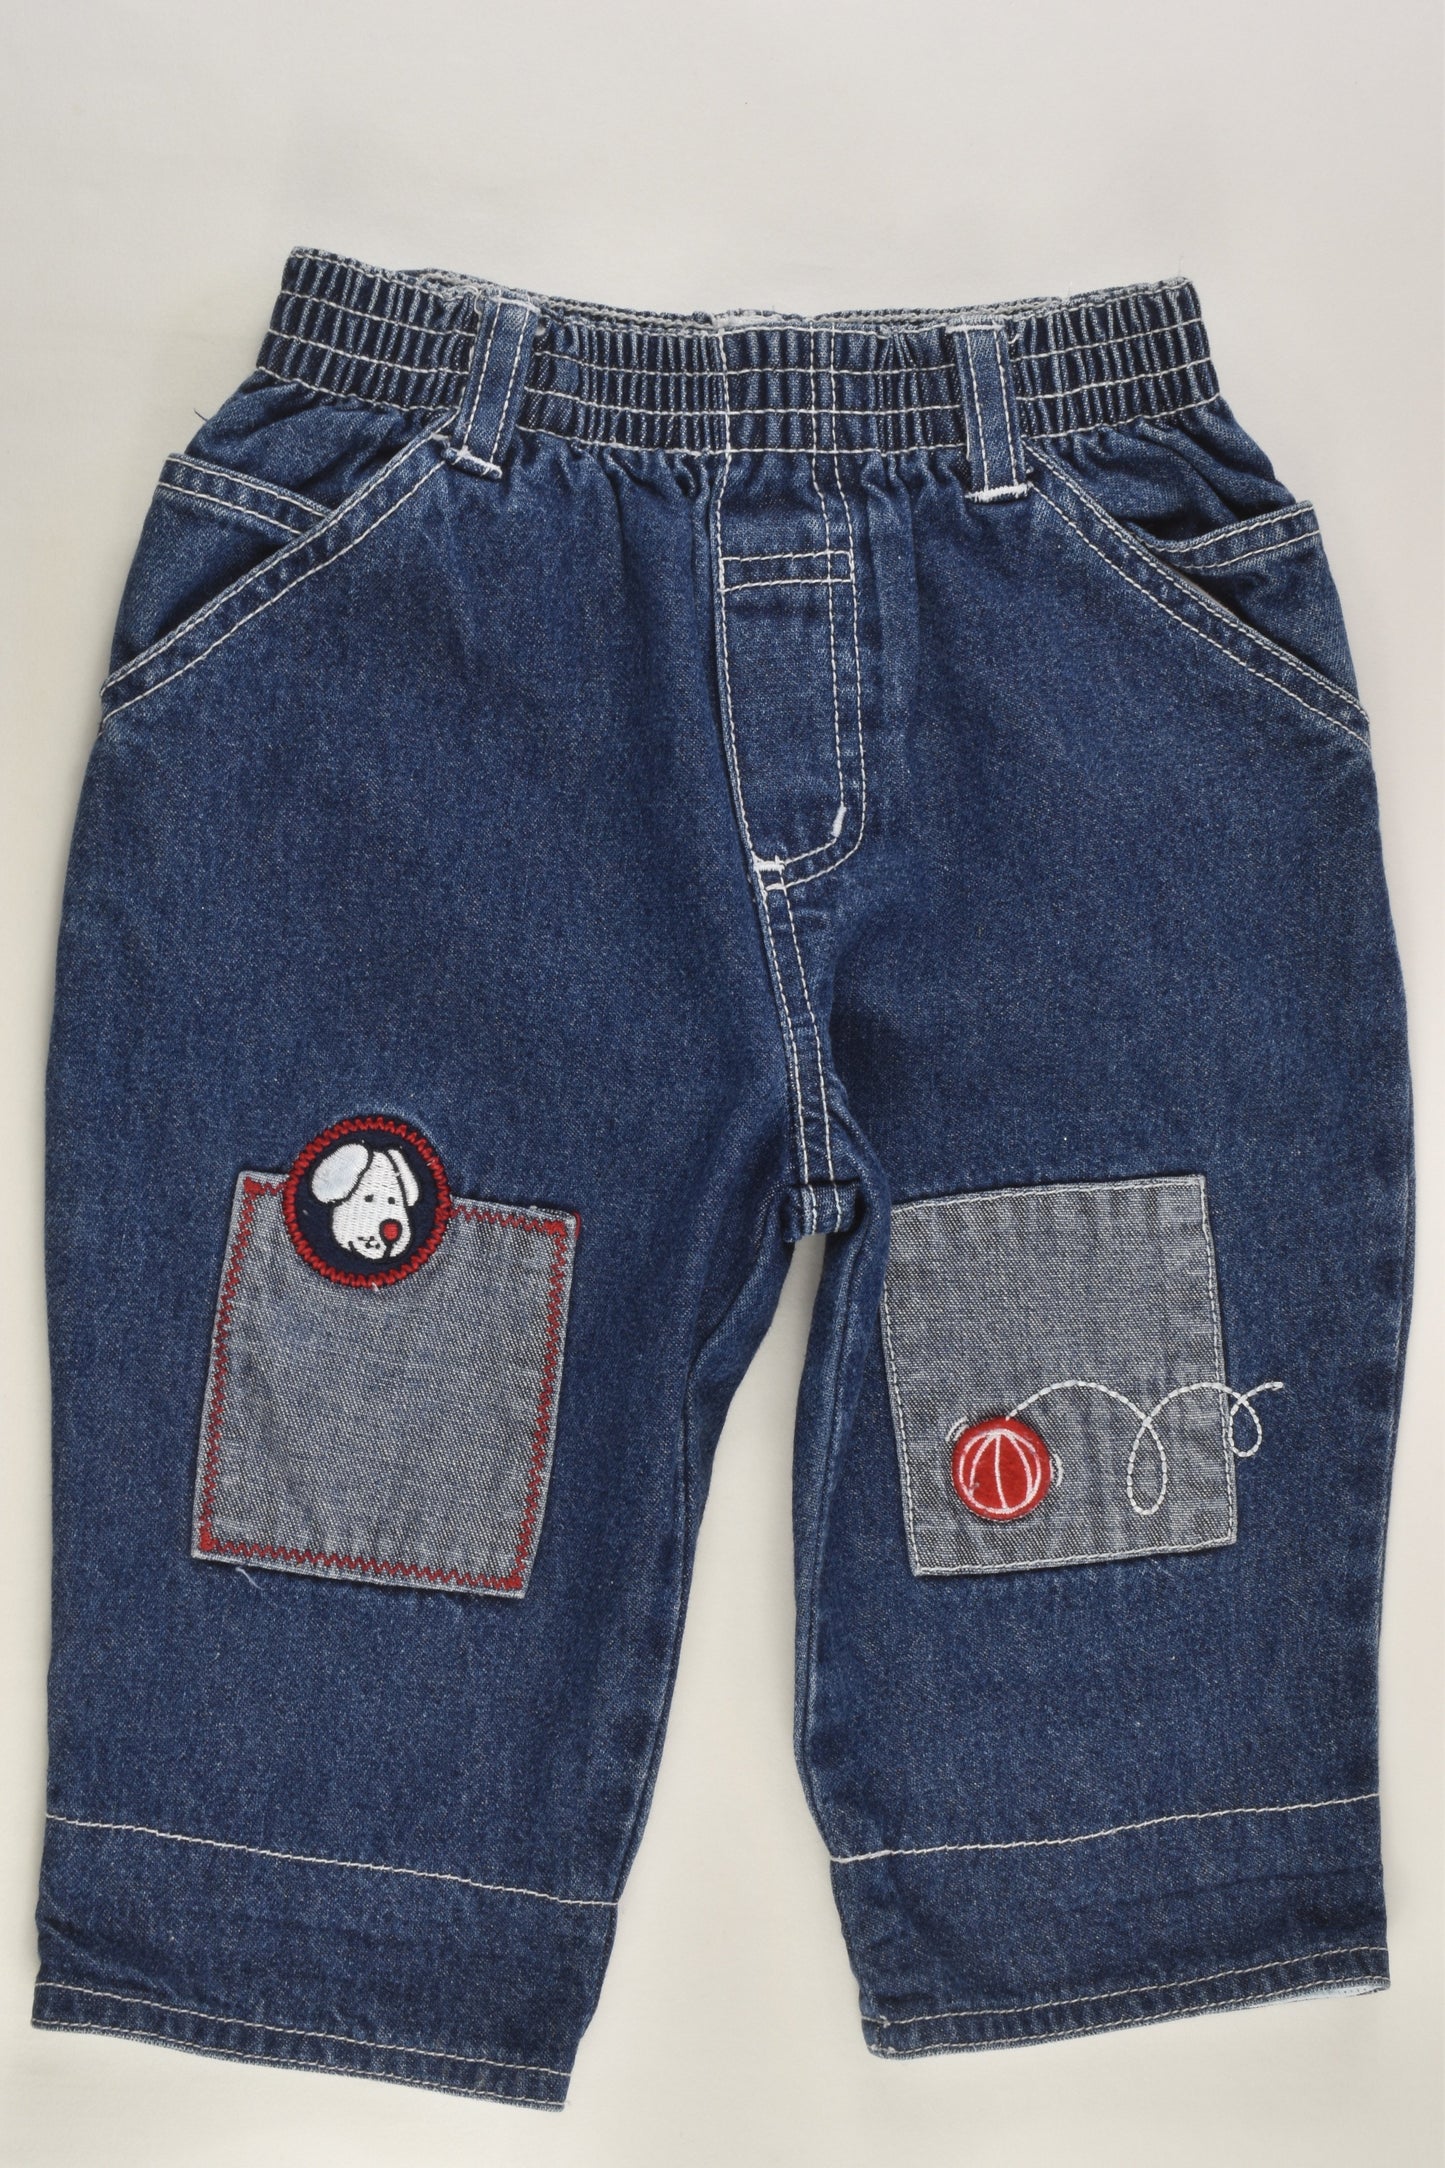 Target (Older Style) Size 0 Dog and Ball Denim Pants